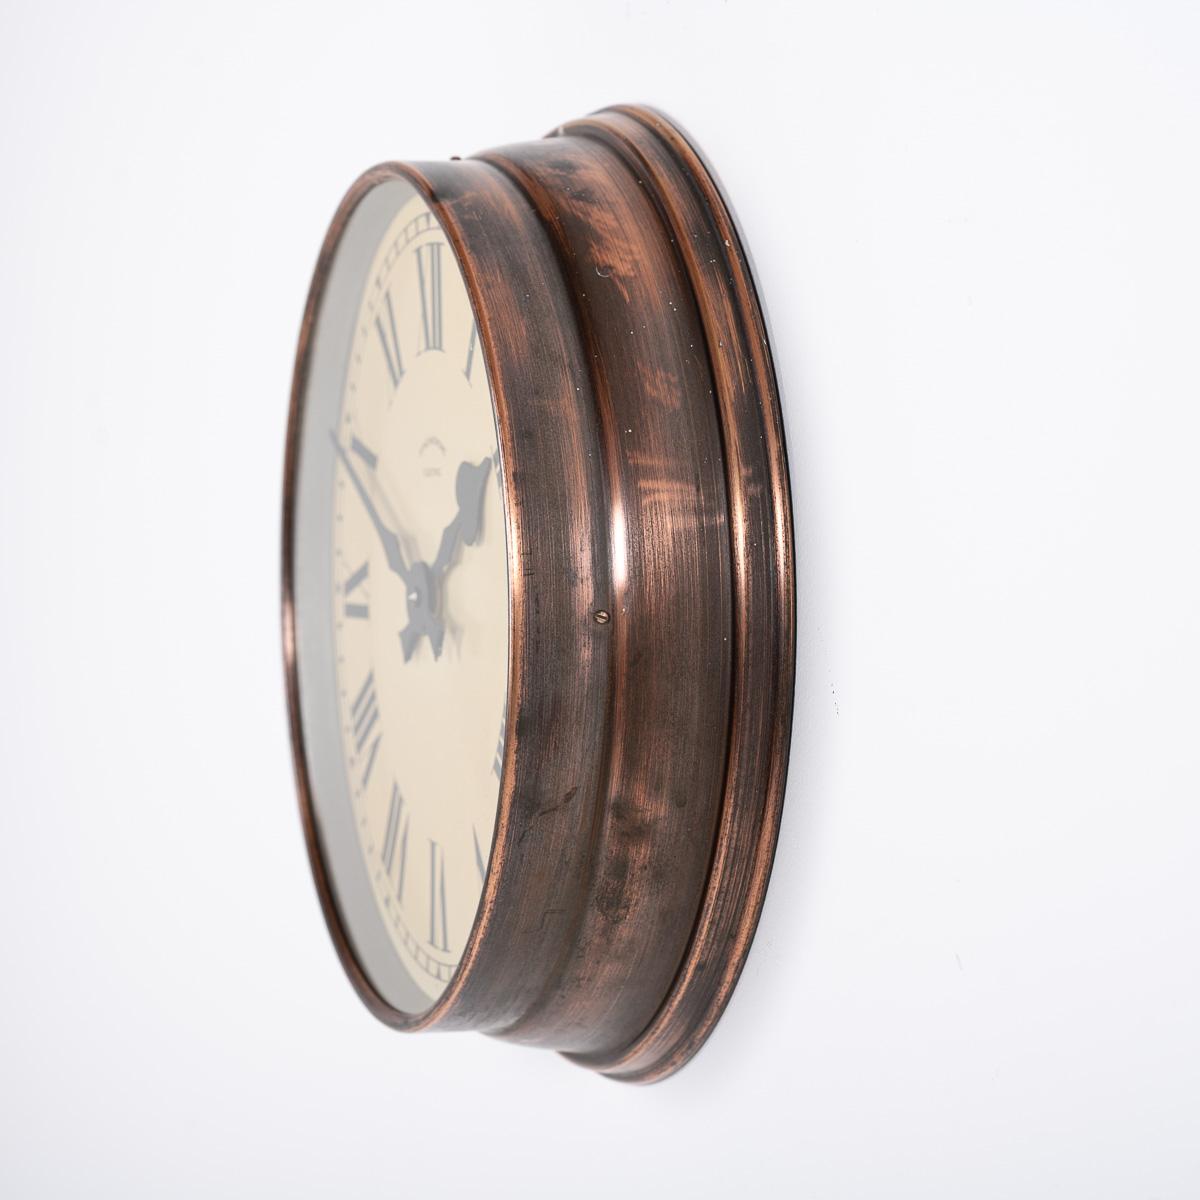 Small Antique Industrial Copper Wall Clock by Synchronome 3